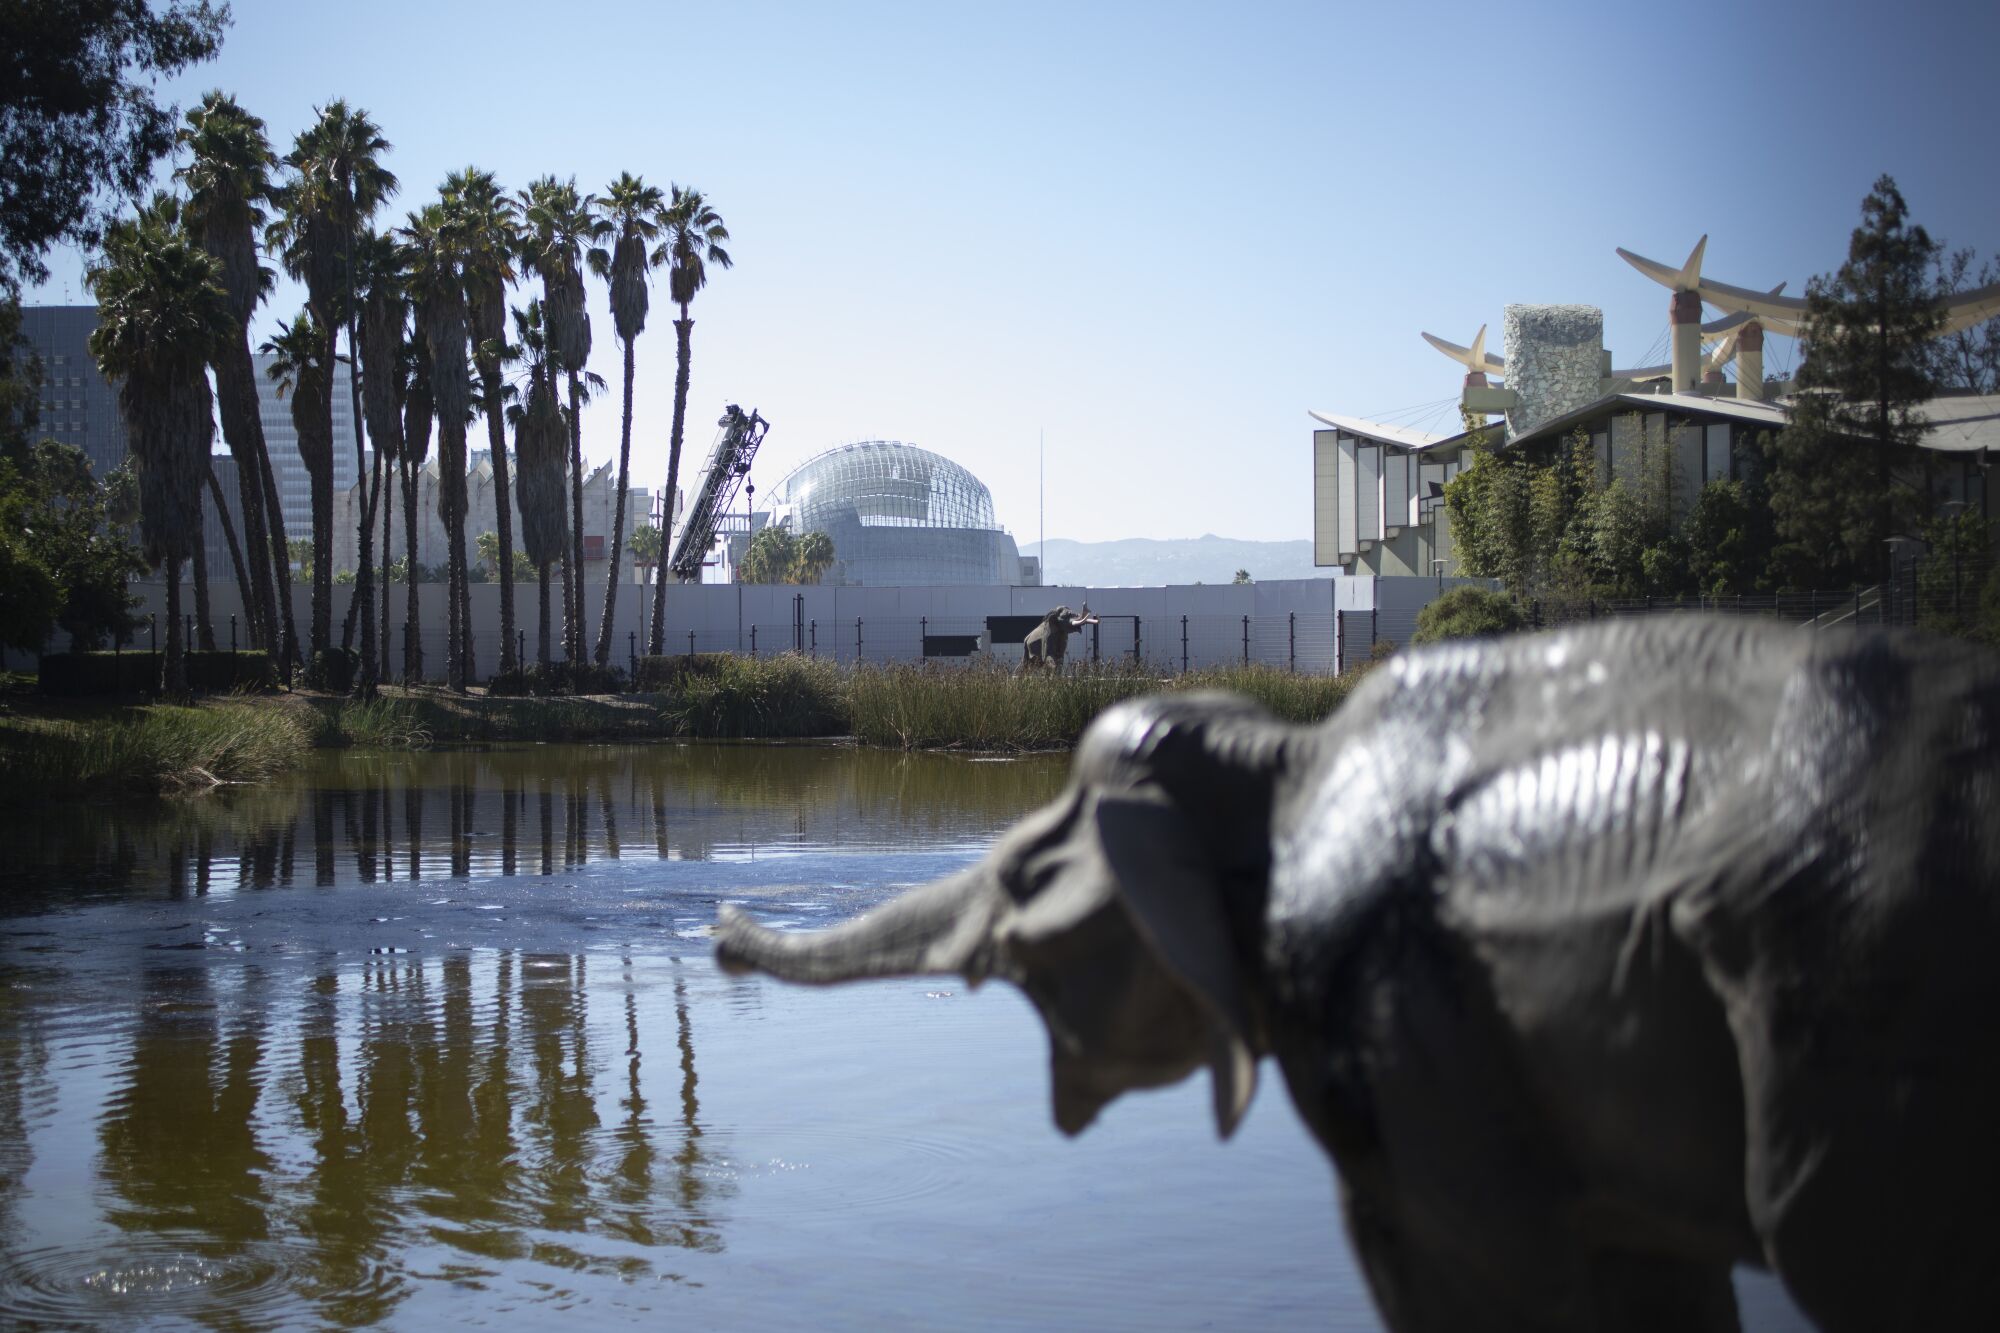 The spherical form of the Geffen Theater is seen in the distance, beyond the Lake Pit and a sculpture of a baby mammoth